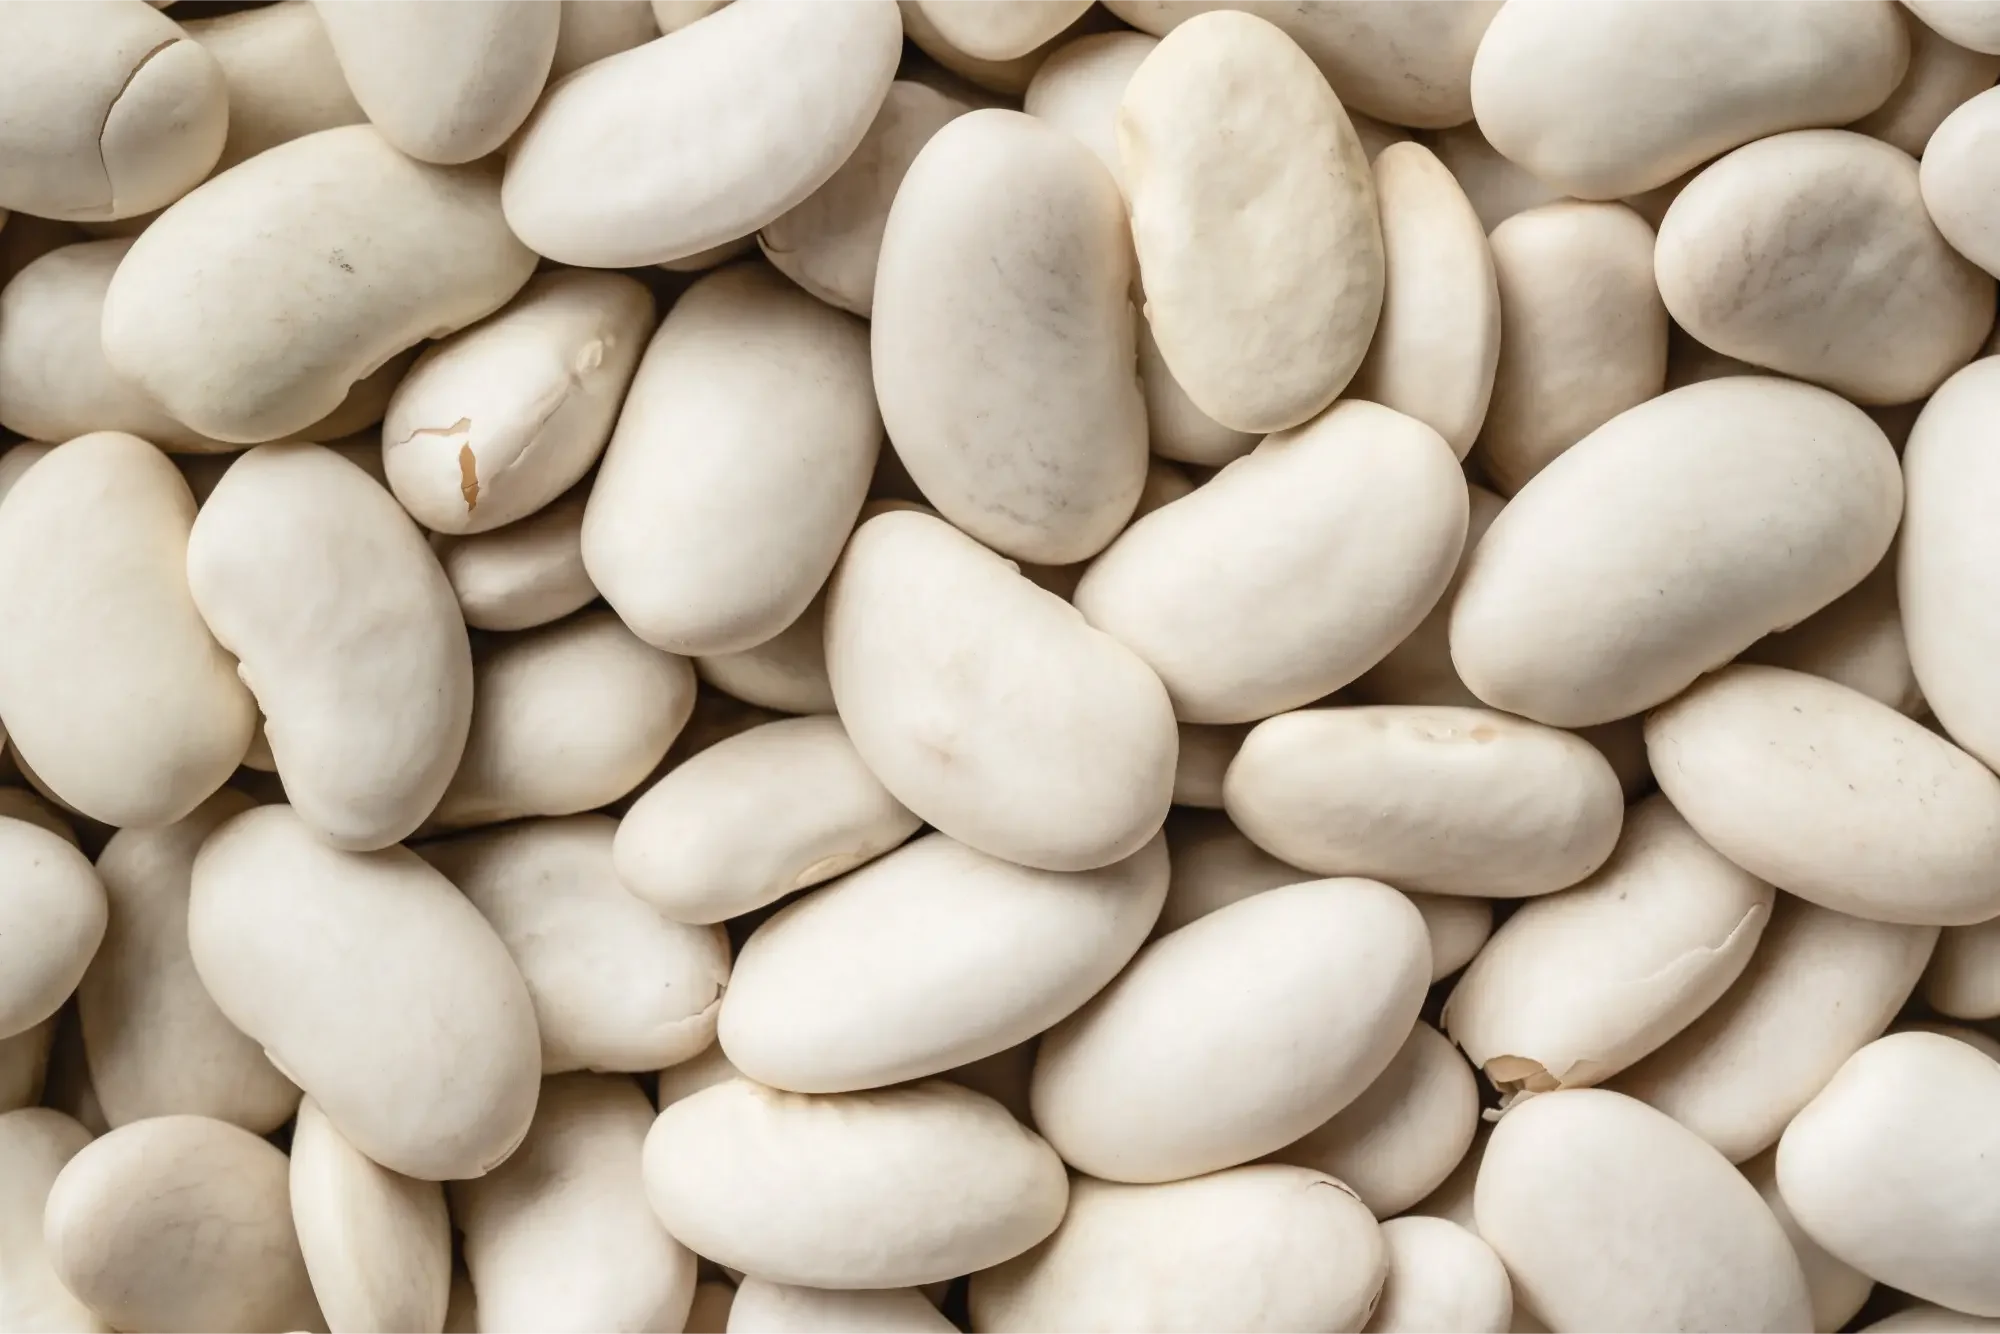 Are Beans Bad For Gout?